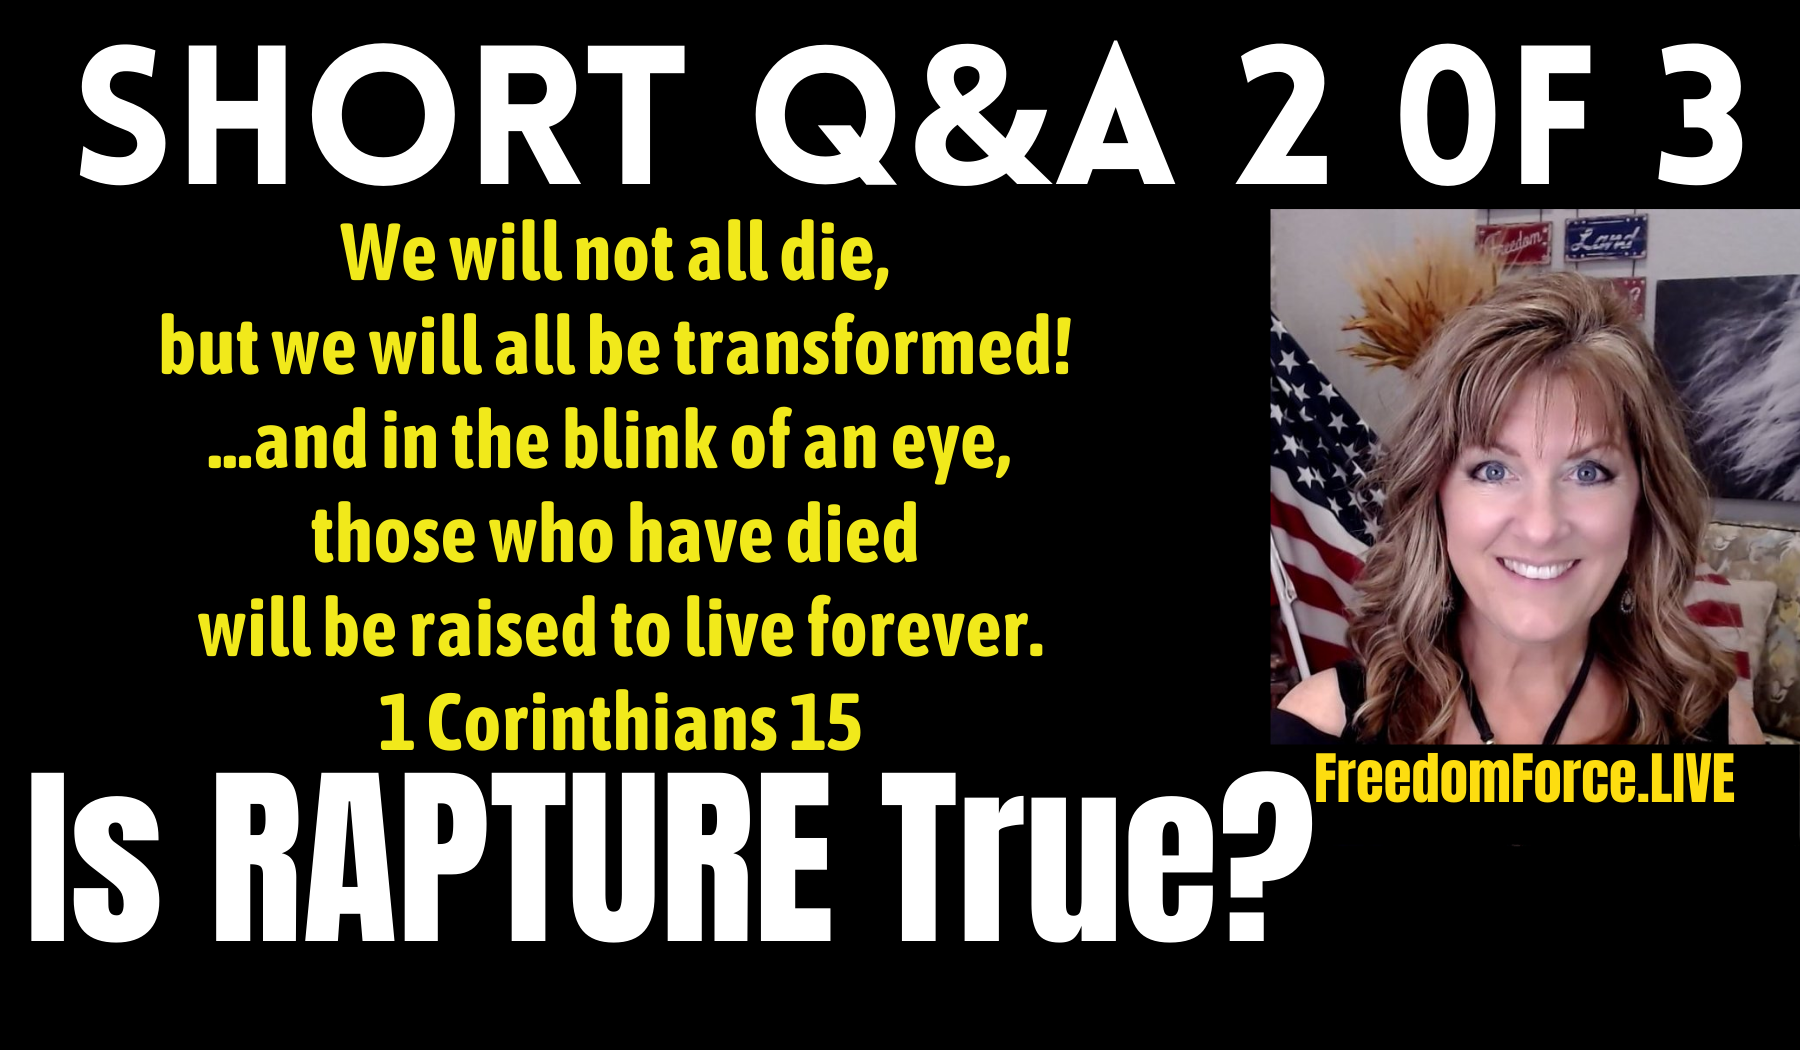 Q&A 2 of 3 – Is RAPTURE True? (plus Man of Lawlessness revealed) 11-21-21